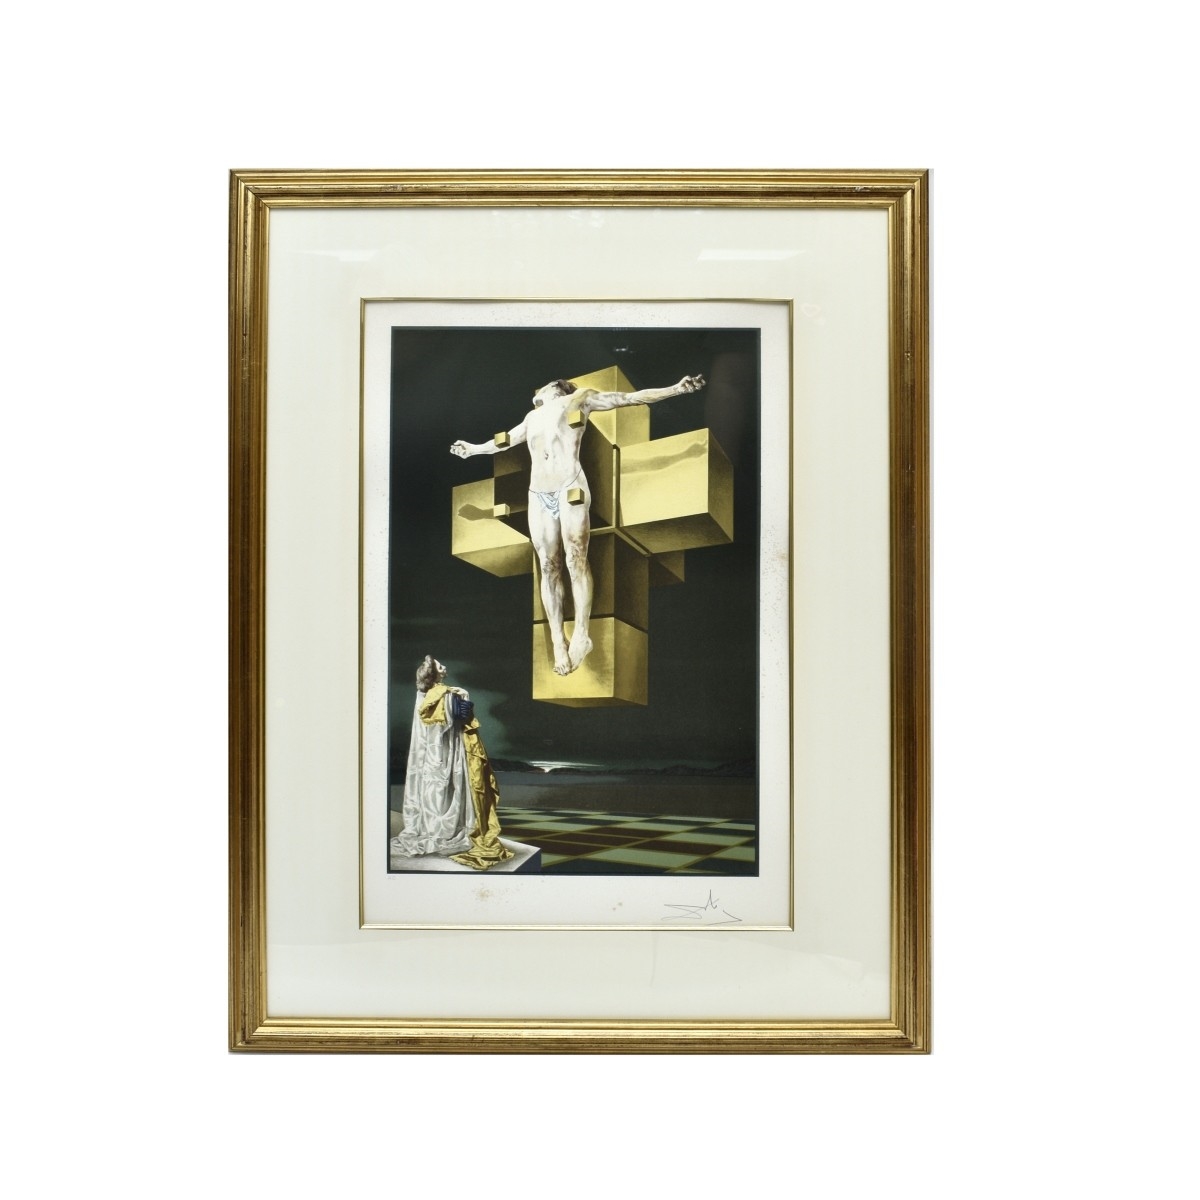 Artwork by Salvador Dalí, Crucifixion, Made of Lithograph on Paper